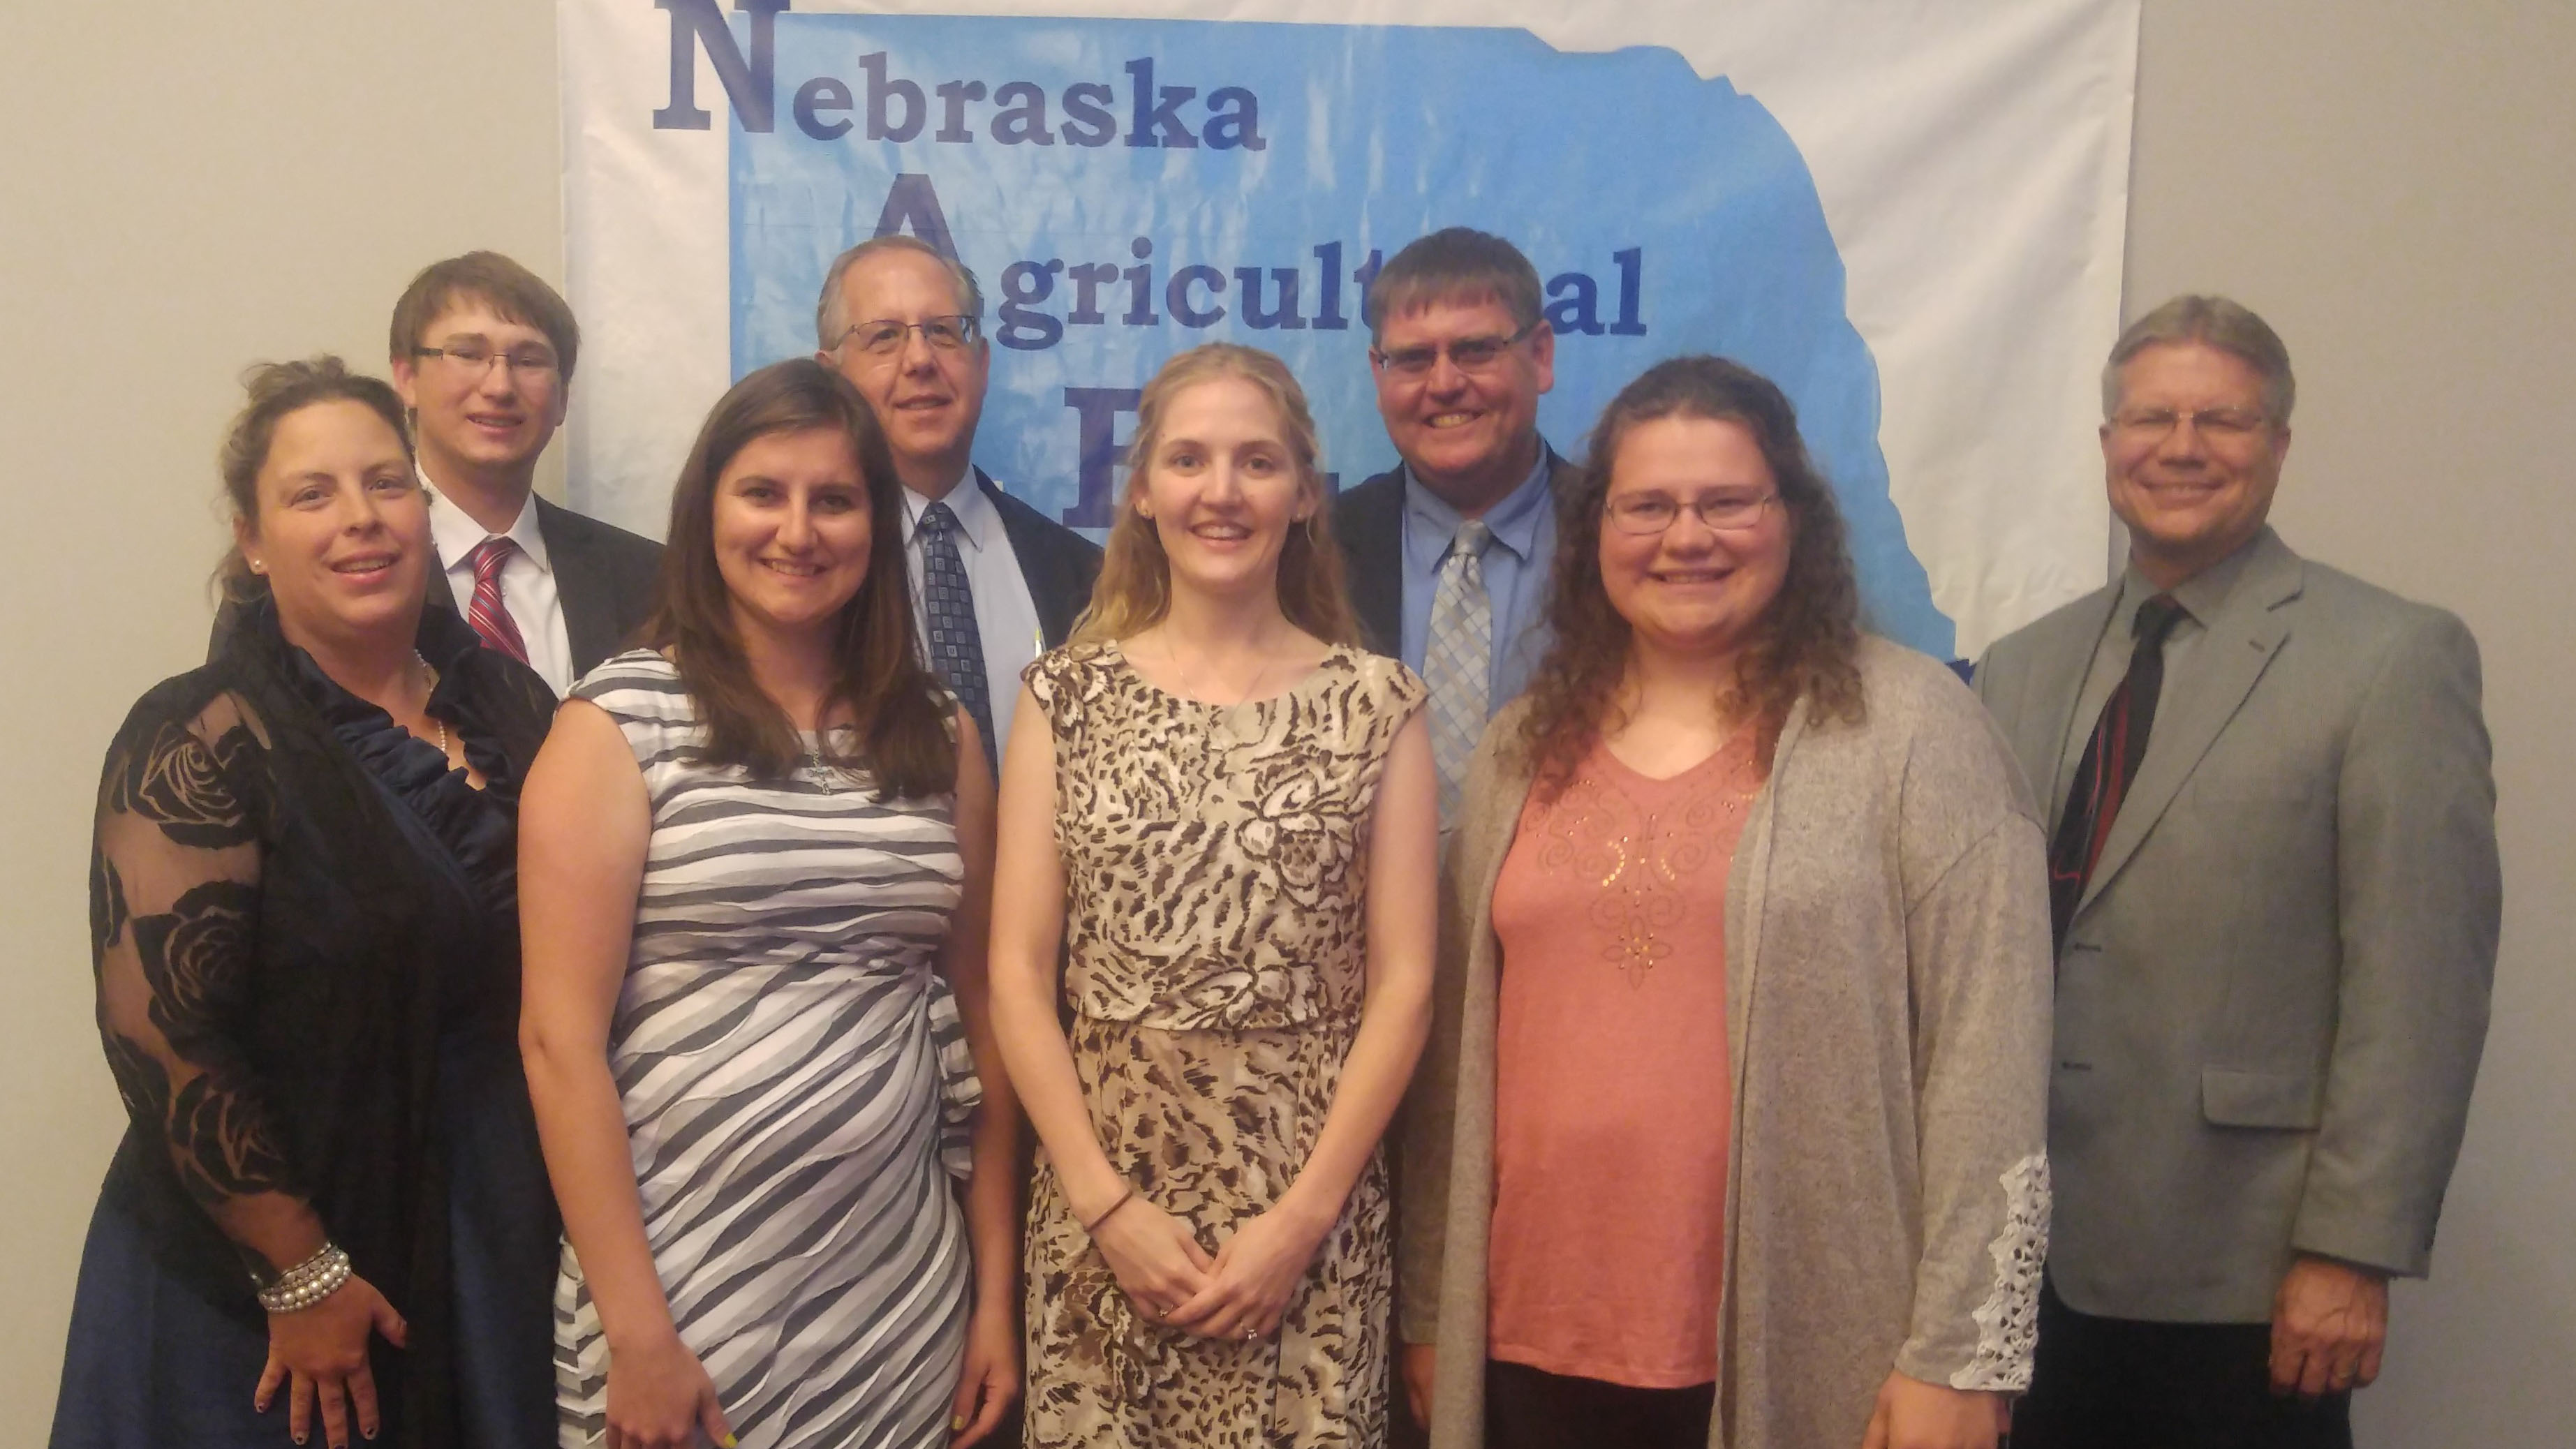 The Nebraska Agricultural Educators Association 2017 annual meeting at Kearney gathered alumni and future ag teachers from the Nebraska College of Technical Agriculture in Curtis. Fourteen NCTA alumni will be teaching in Nebraska ag and FFA programs this fall. (NCTA photo)